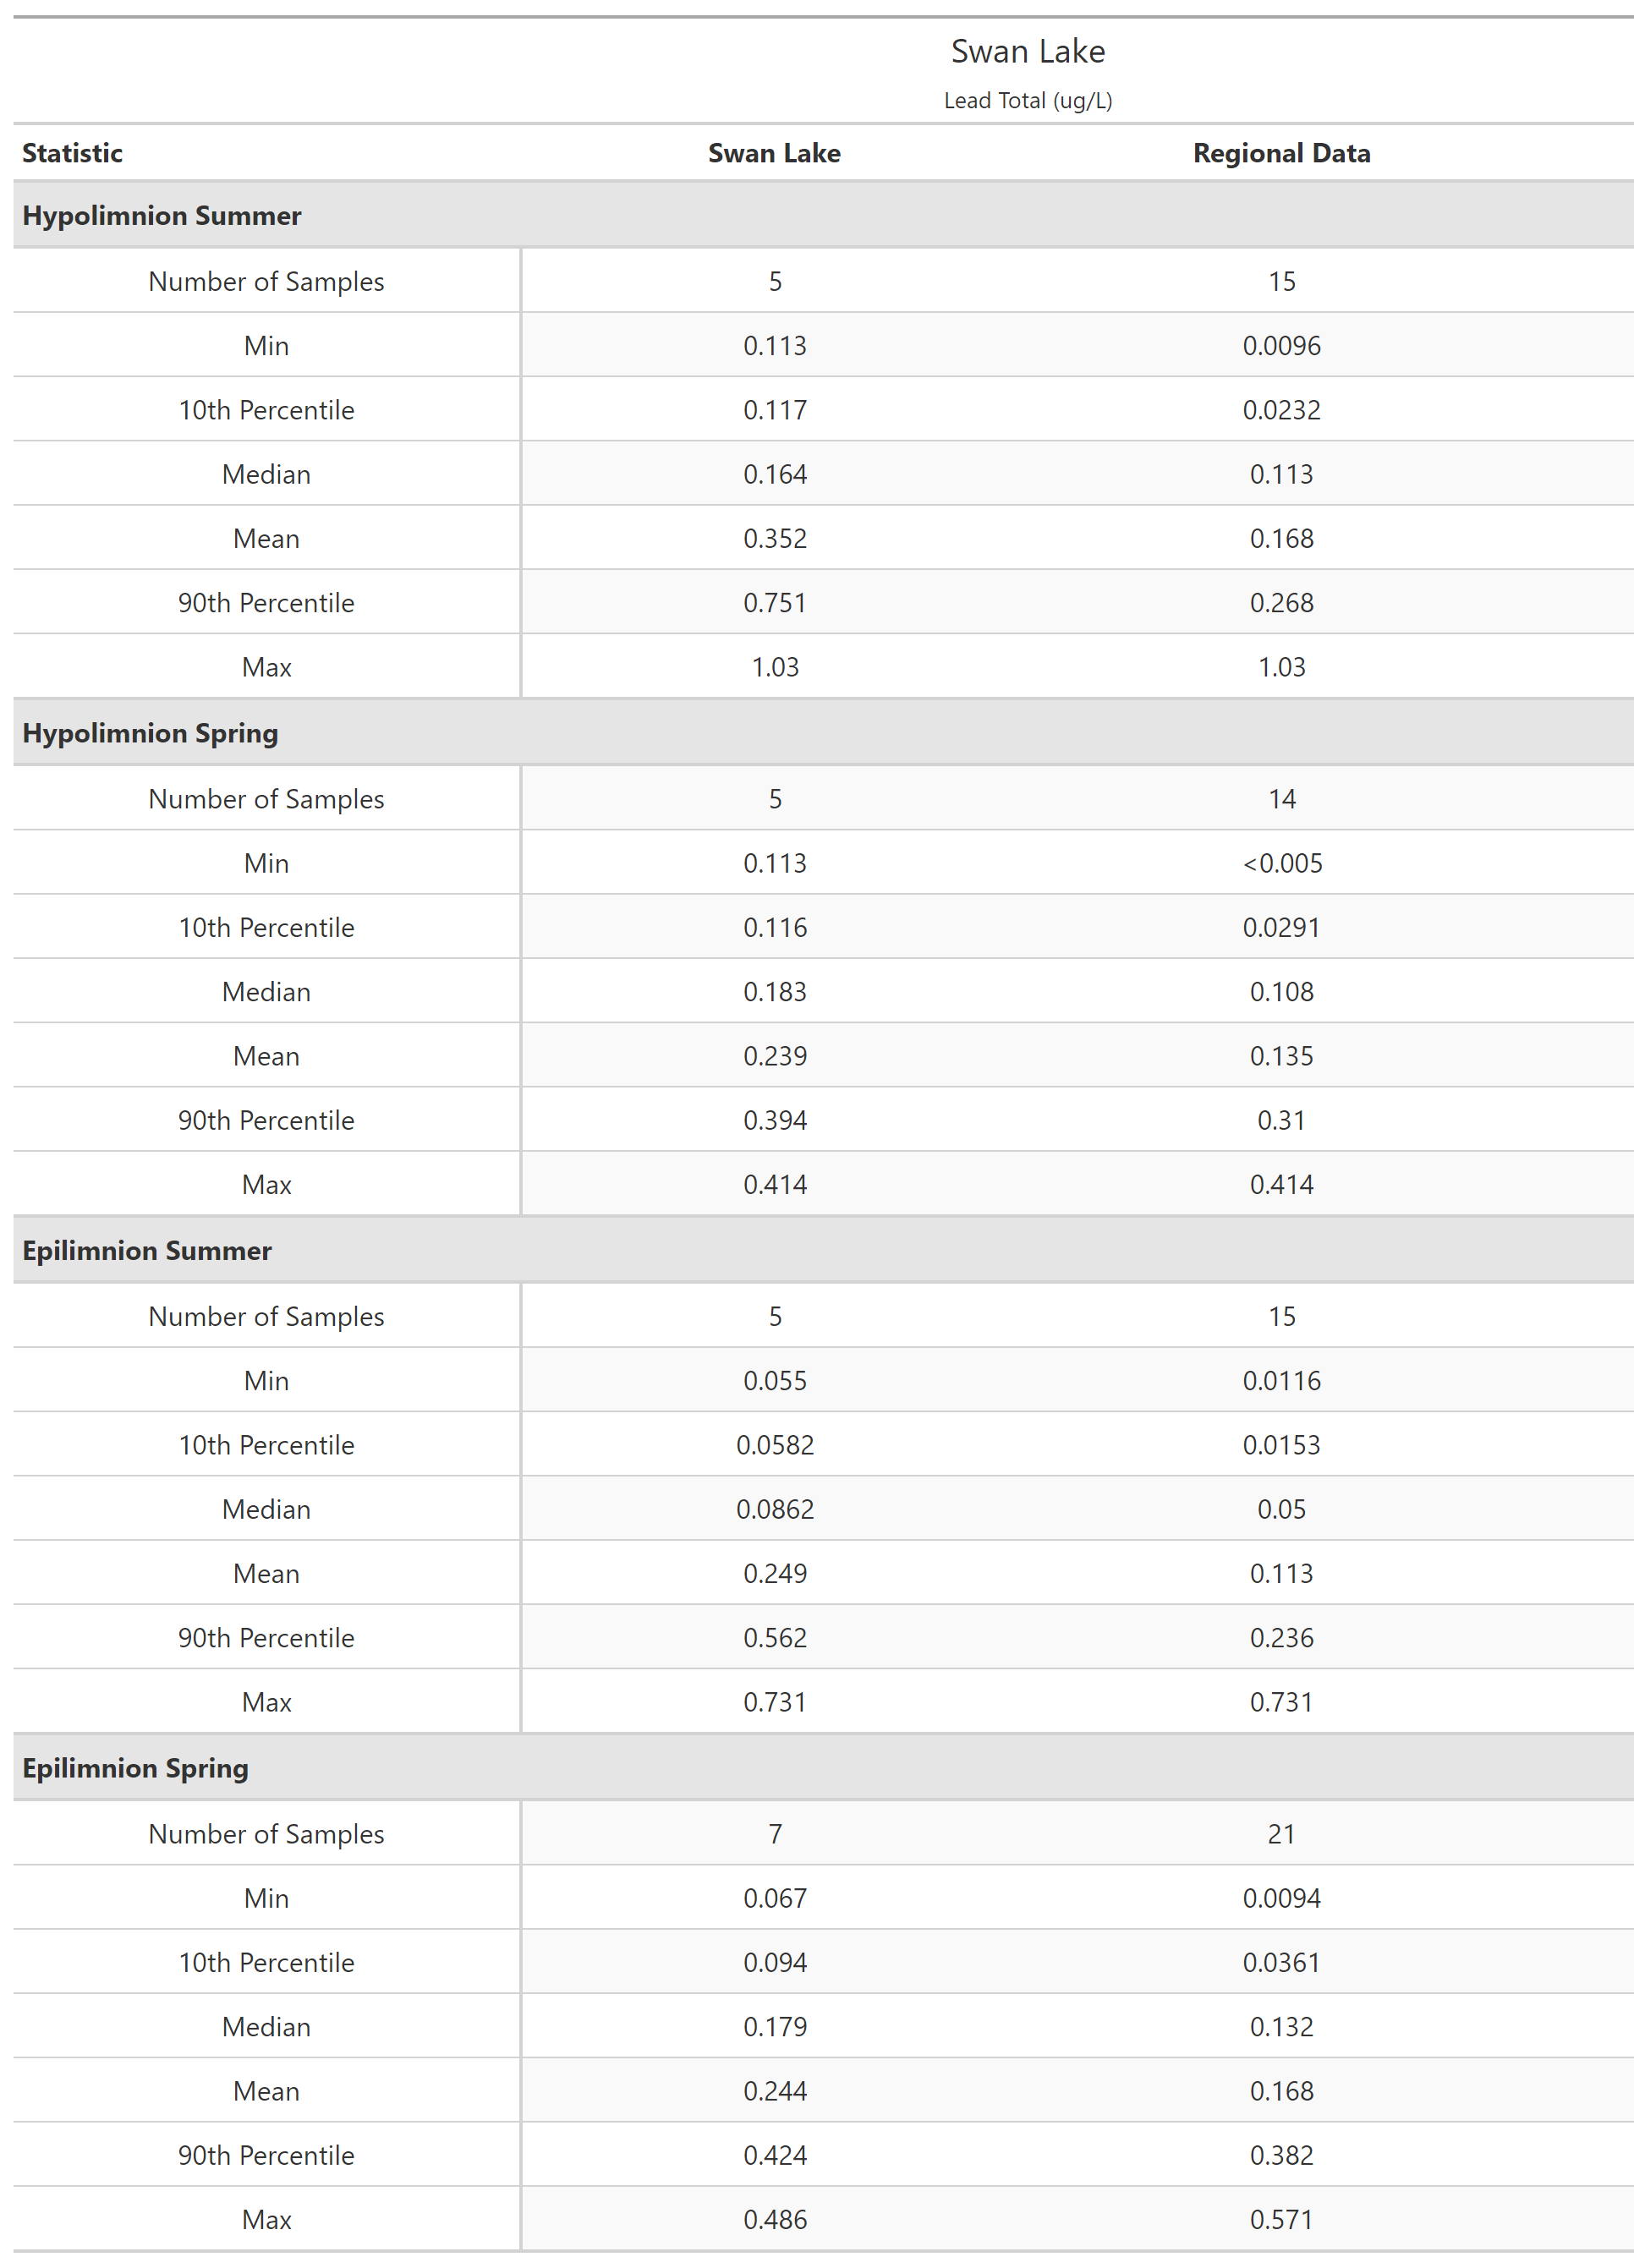 A table of summary statistics for Lead Total with comparison to regional data